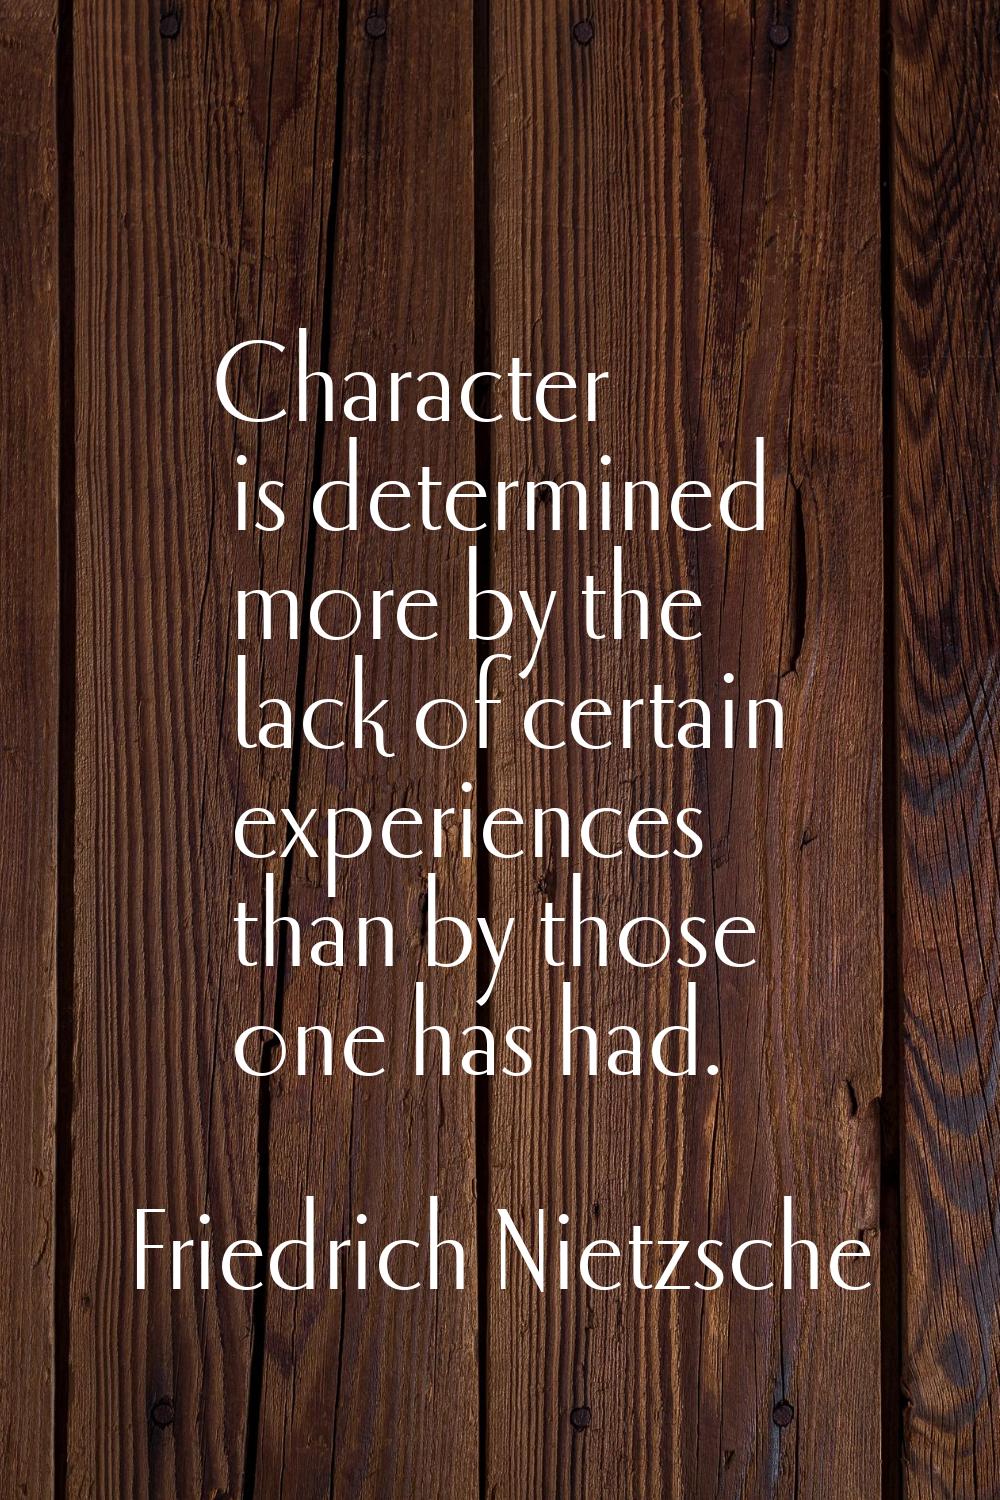 Character is determined more by the lack of certain experiences than by those one has had.